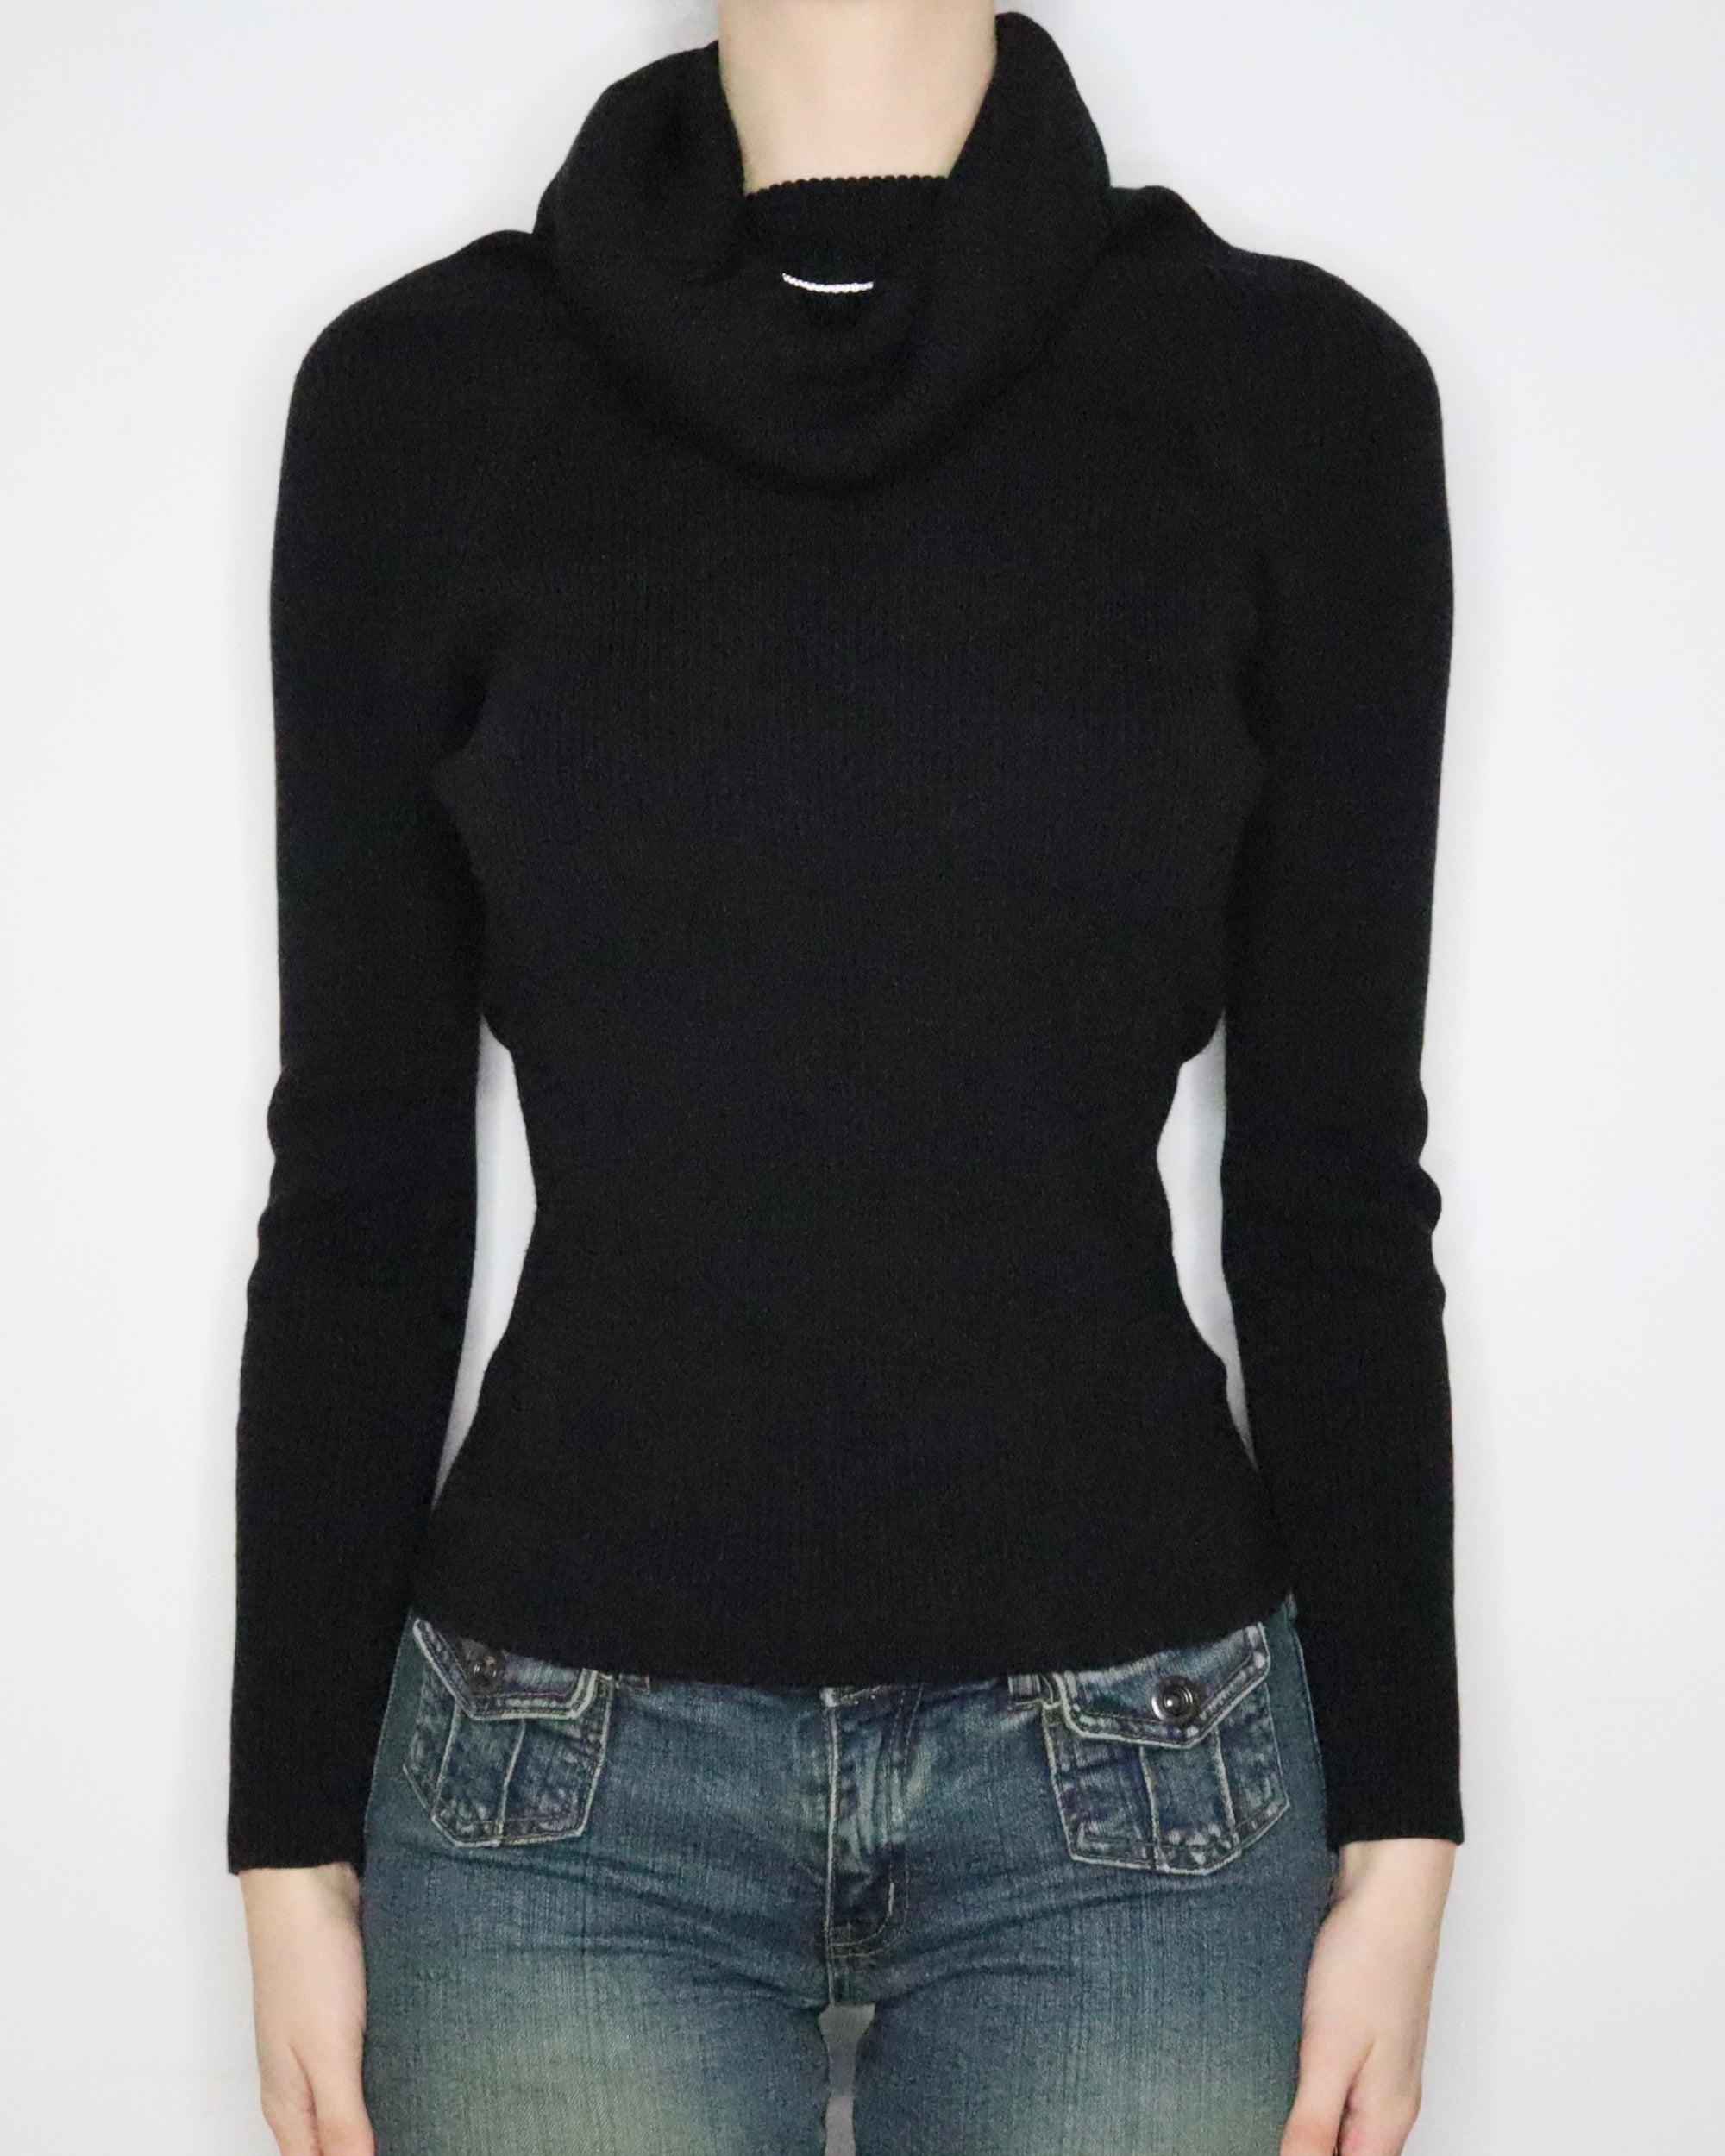 Black Off the Shoulder Sweater (XS-S) 